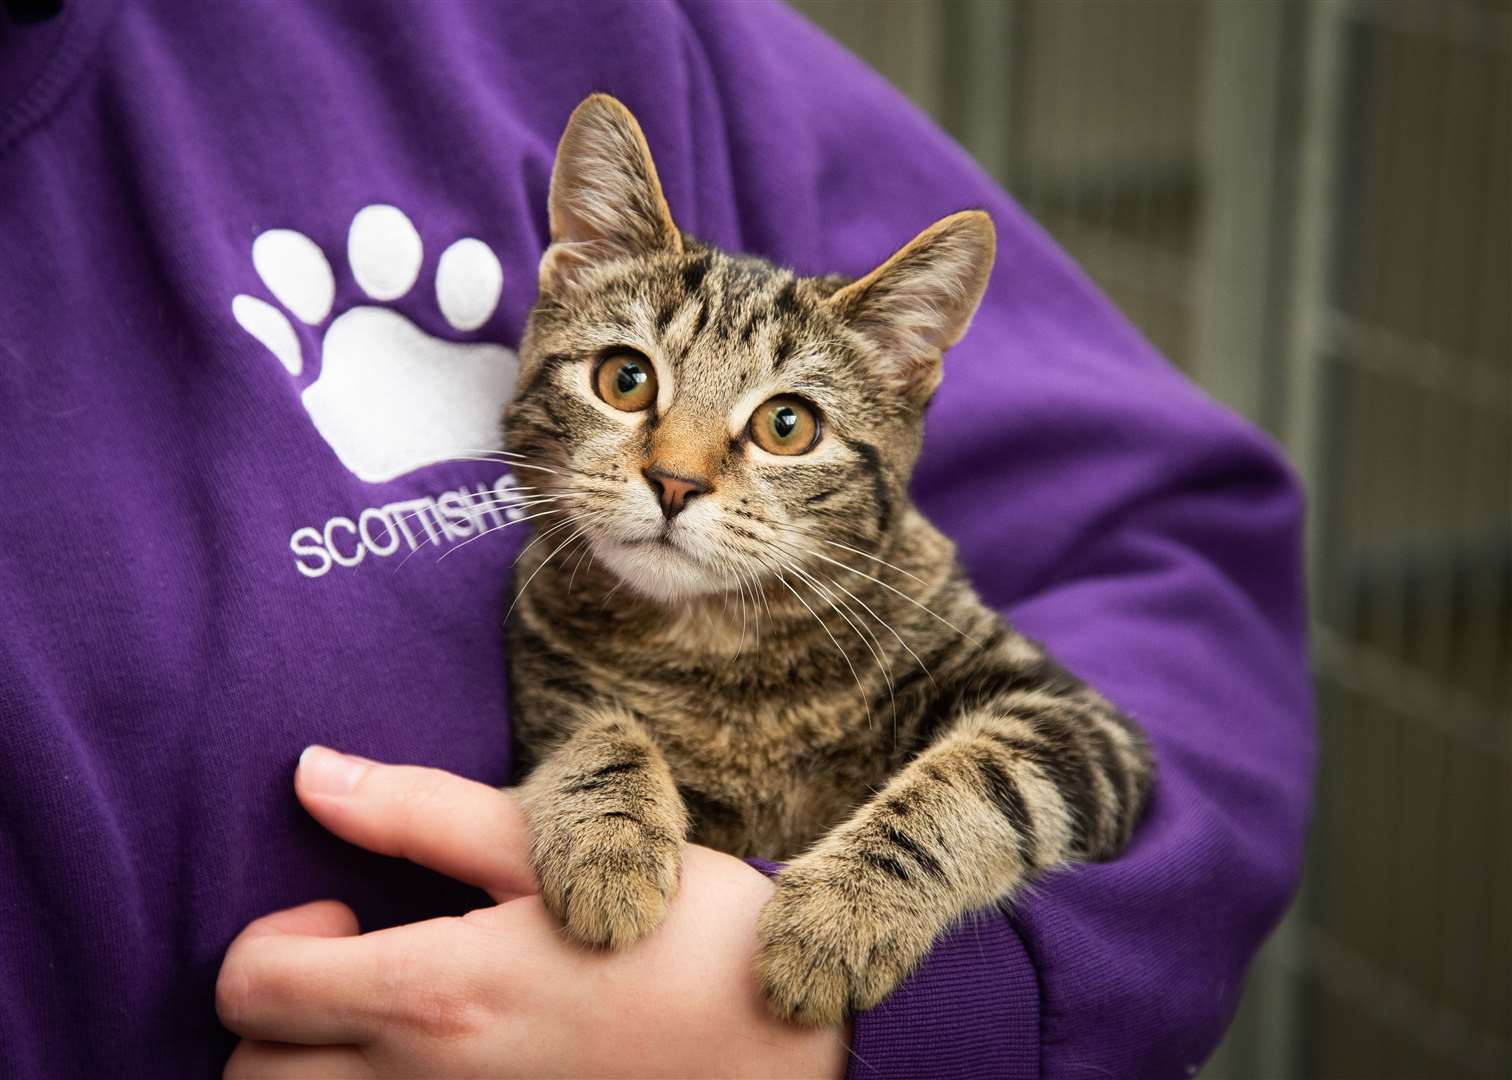 A cat waiting to be rehomed by the Scottish SPCA.